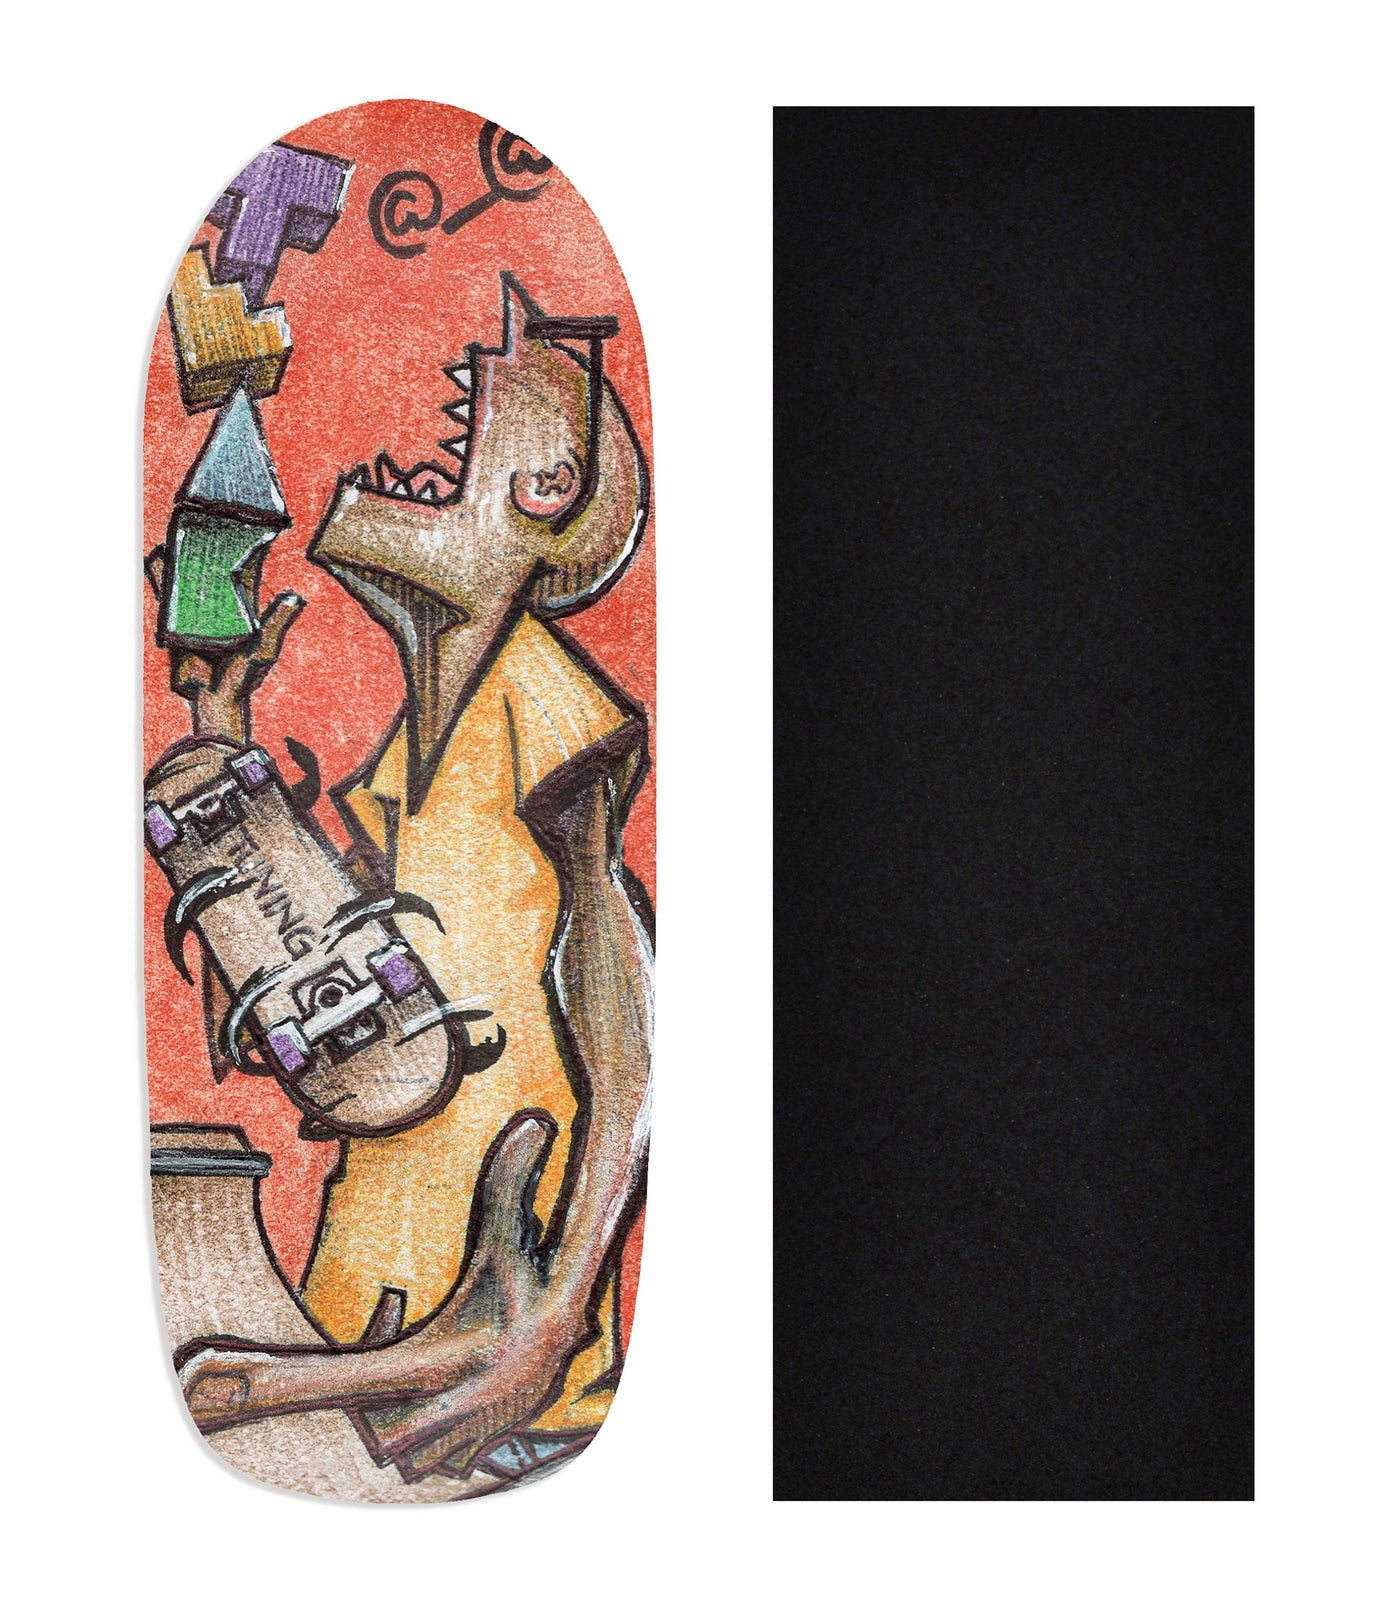 Teak Tuning Heat Transfer Graphic Wooden Fingerboard Deck, @louis_costa - Entry# 49 Poolparty Deck